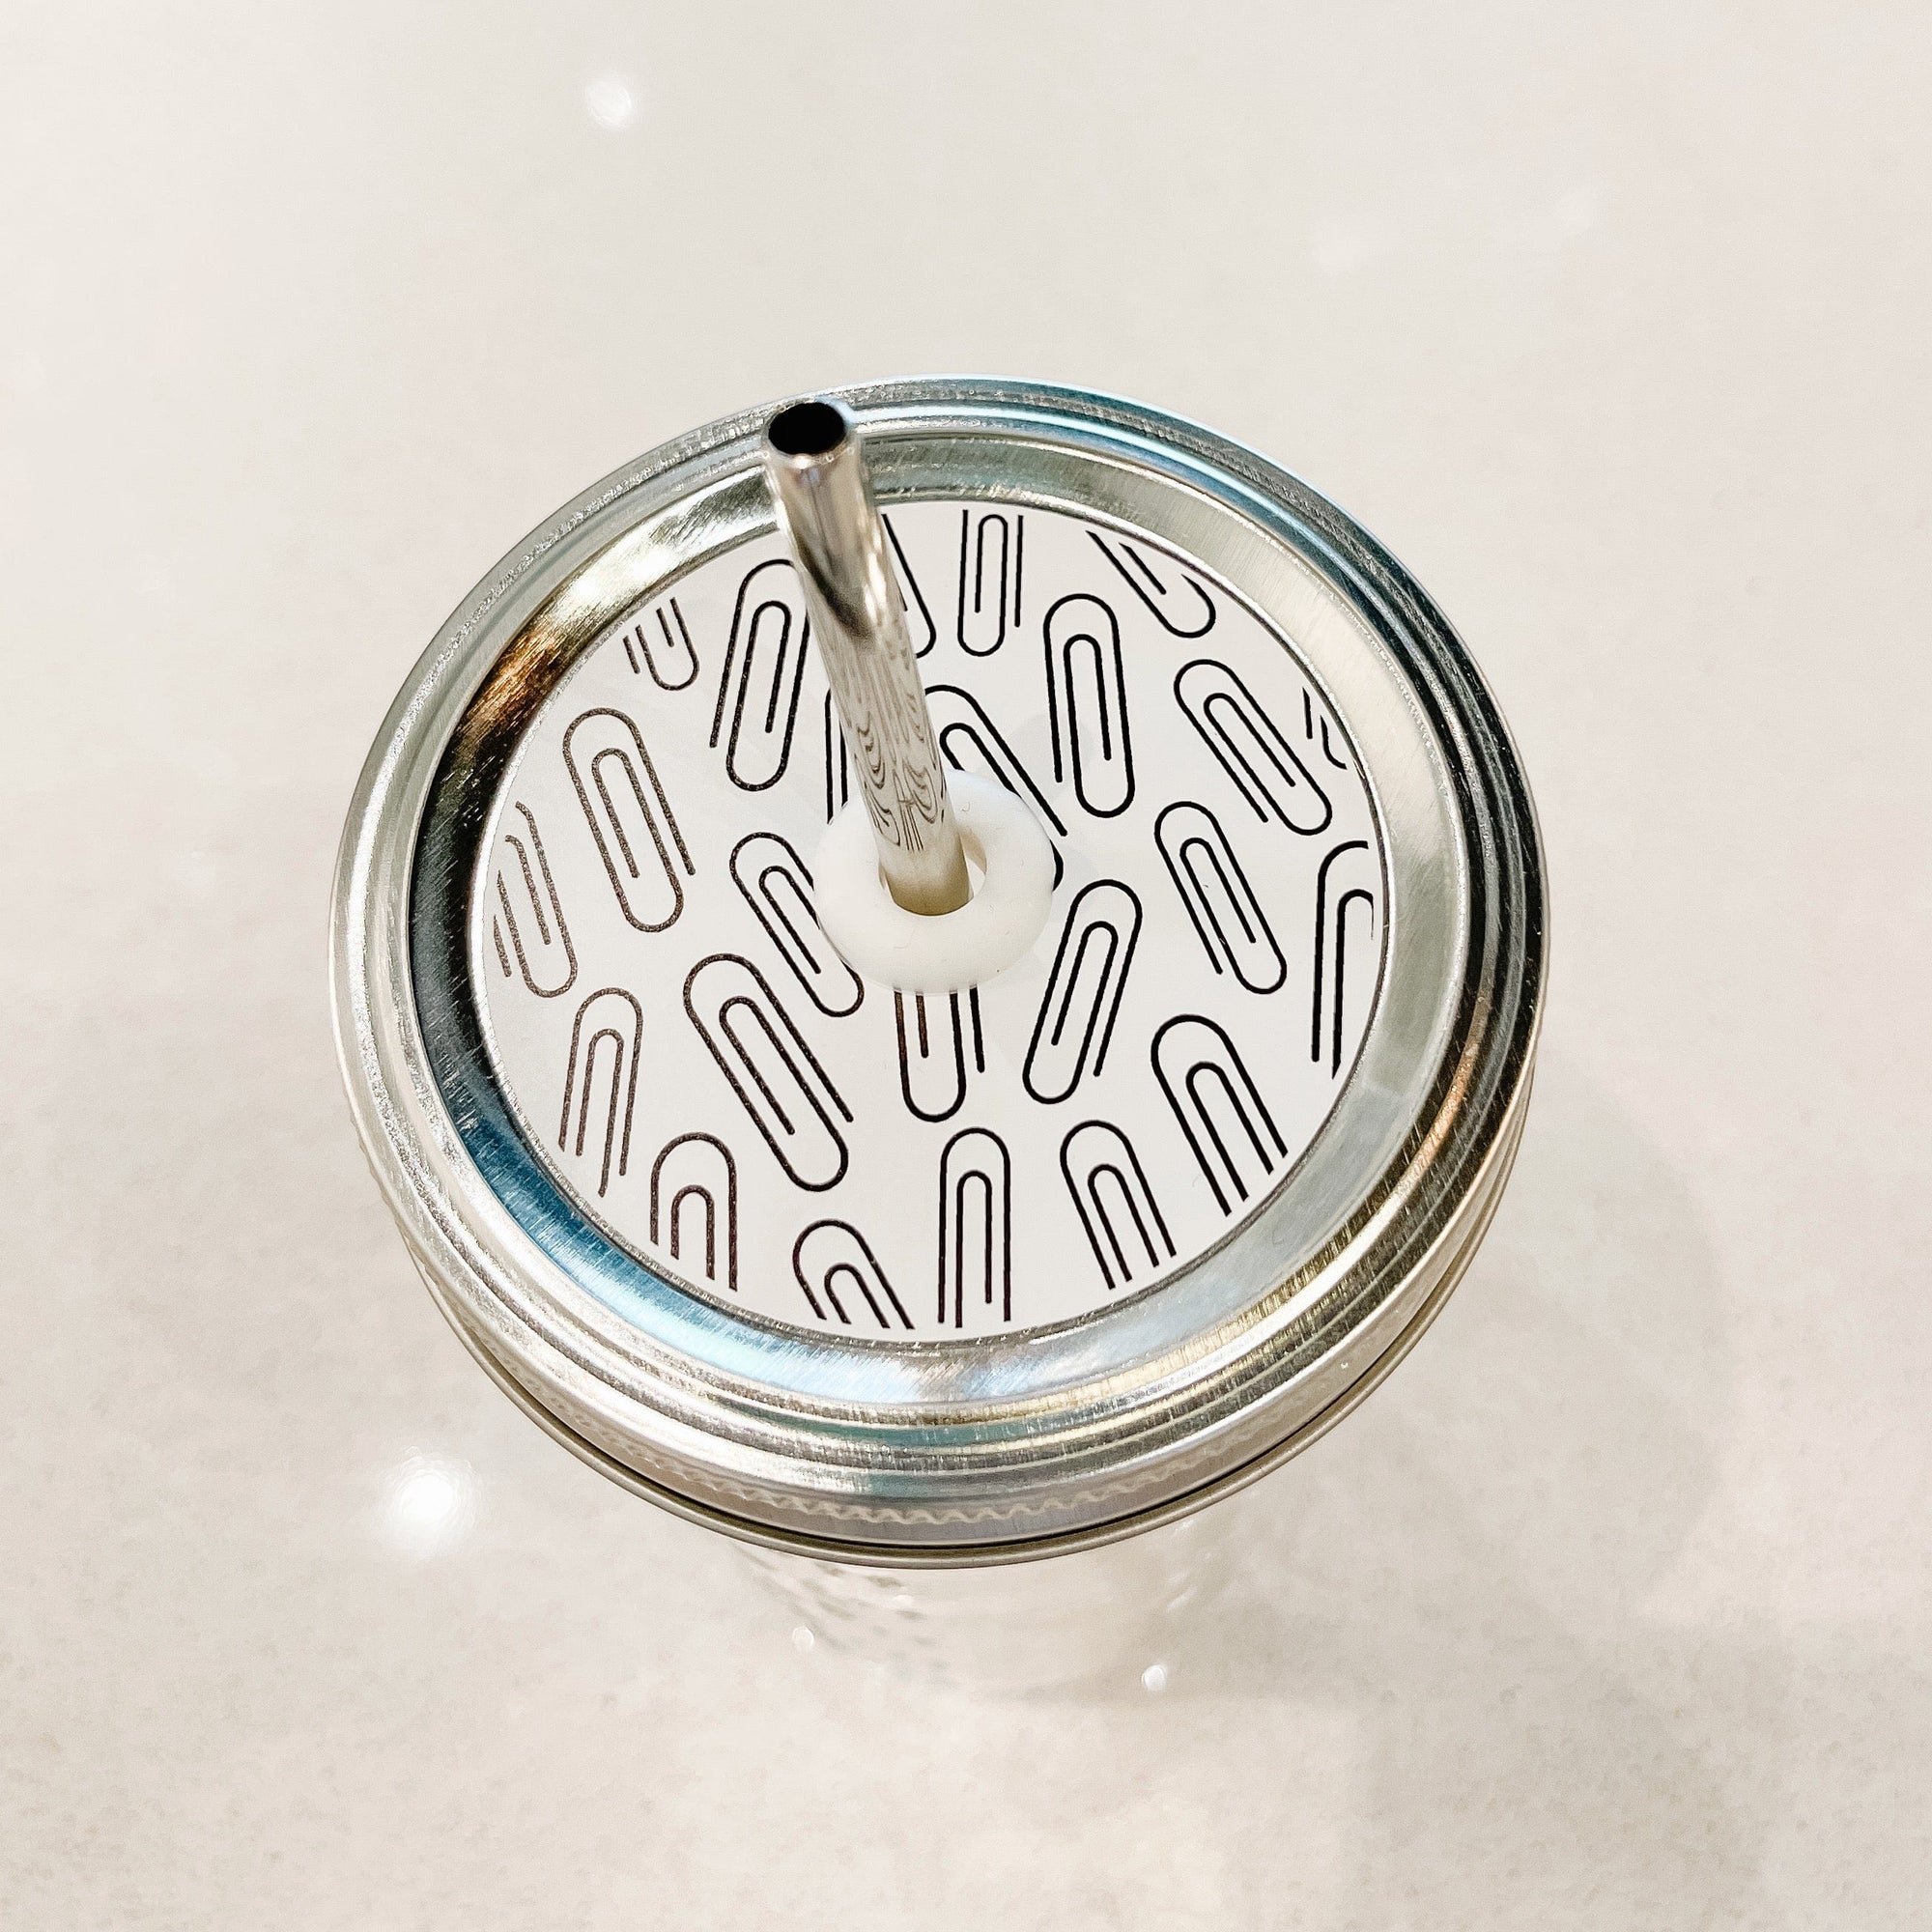 Silver lid with a paper clips on white patterned mason jar straw lid against a white background.